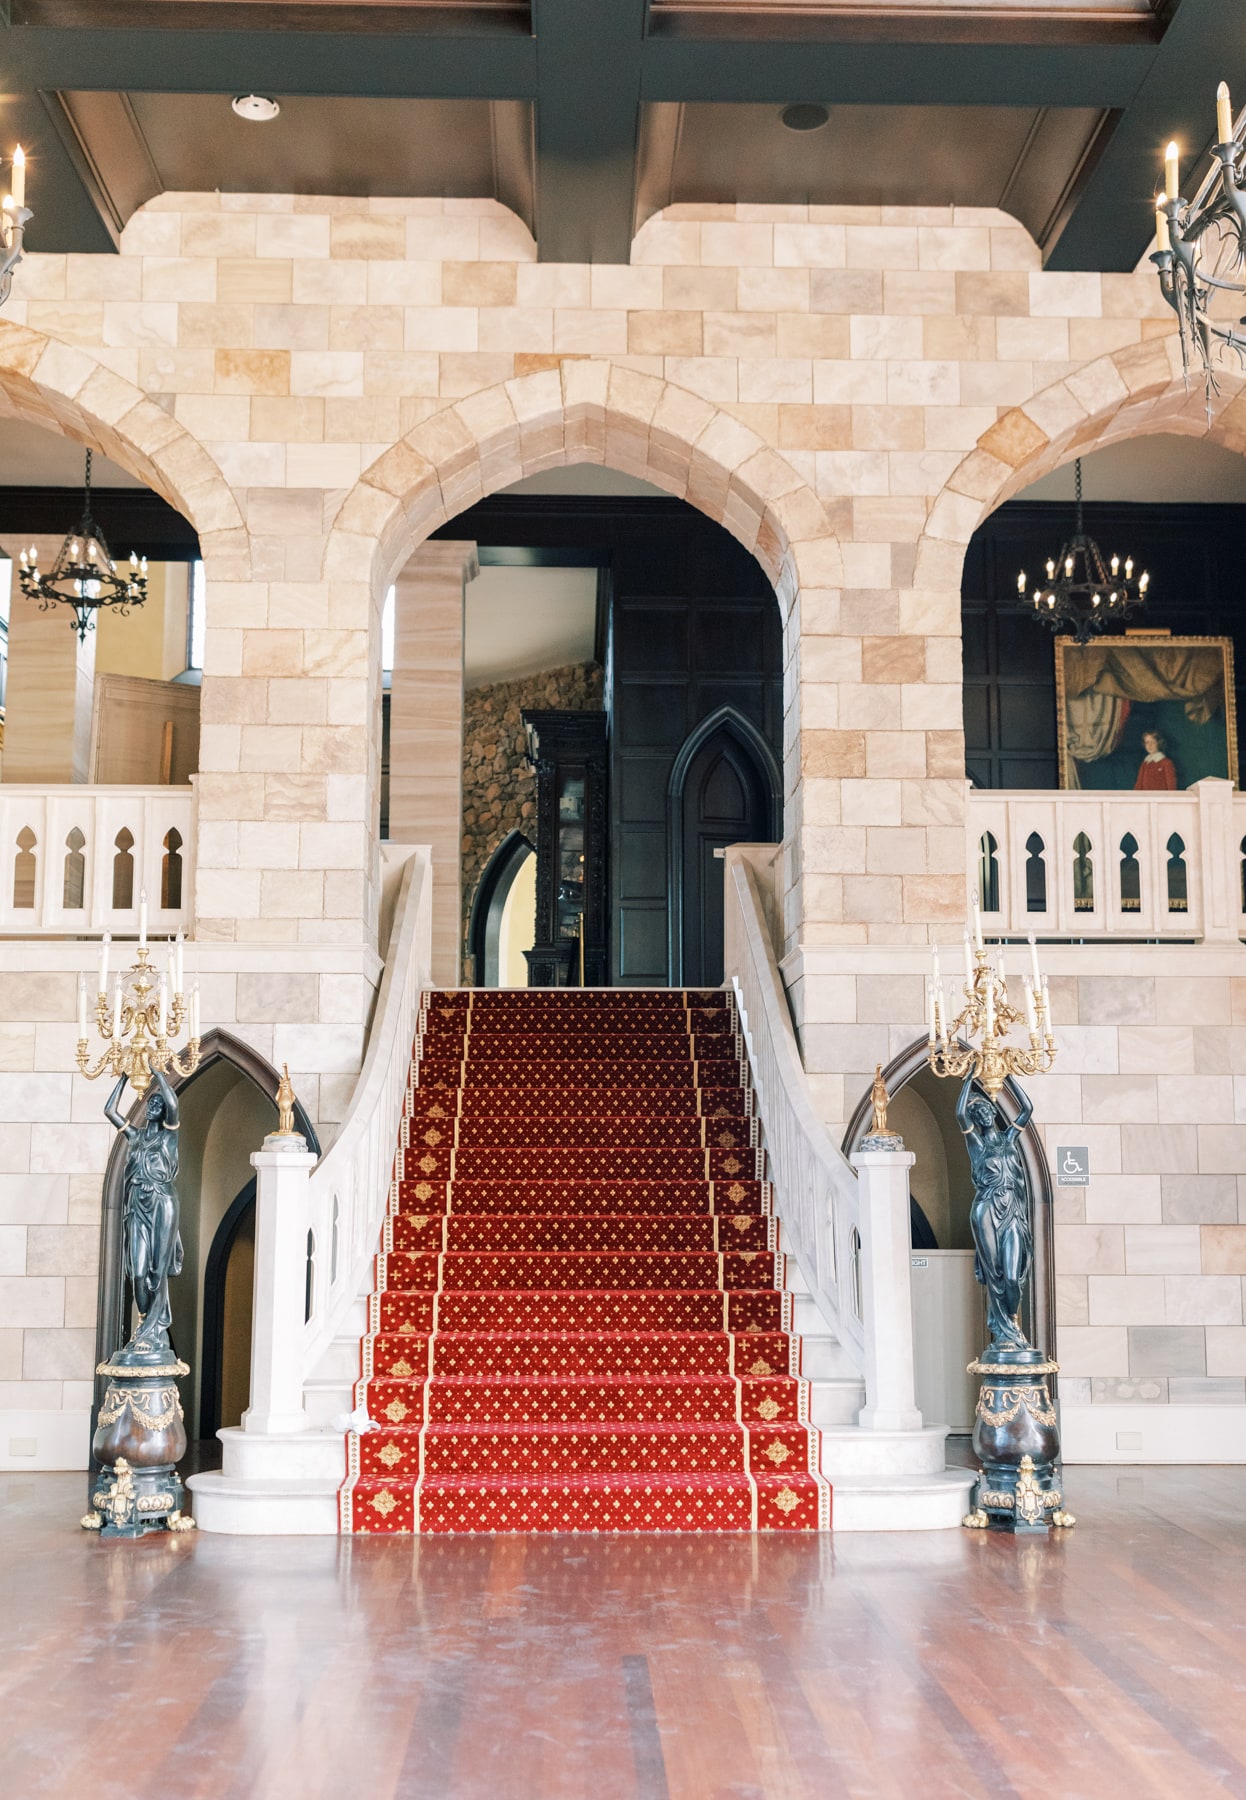 The grand staircase  is lined with bright red carpet, and sand colored stone.